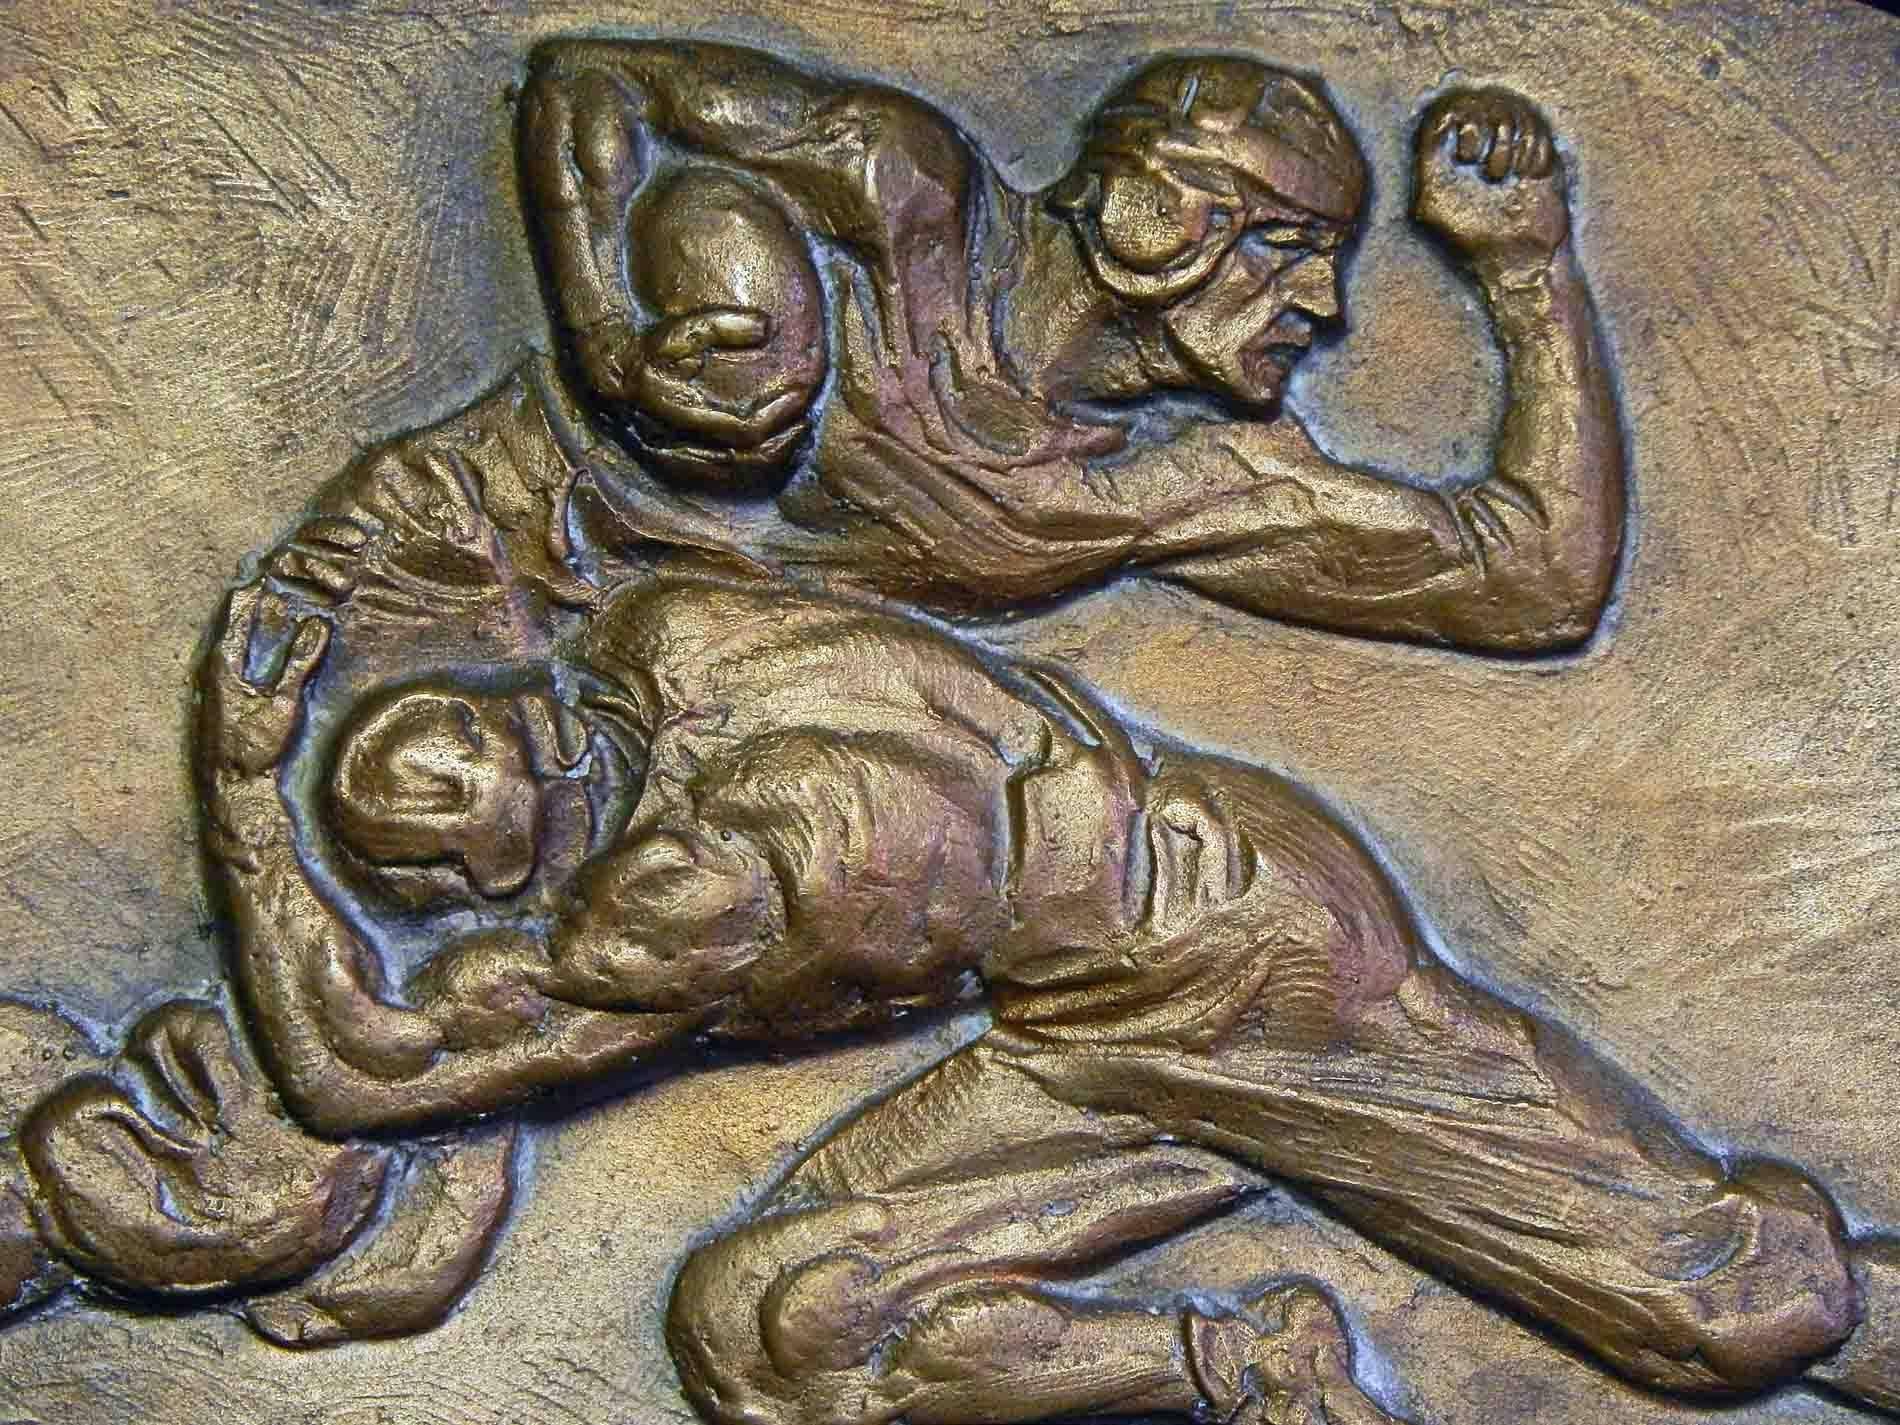 Sculpted and cast as the prototype for a bronze awards plaque celebrating accomplishment in American football, this piece shows two players in the middle of a dramatic tackle. The artist, Fred Torrey, is best known for his 